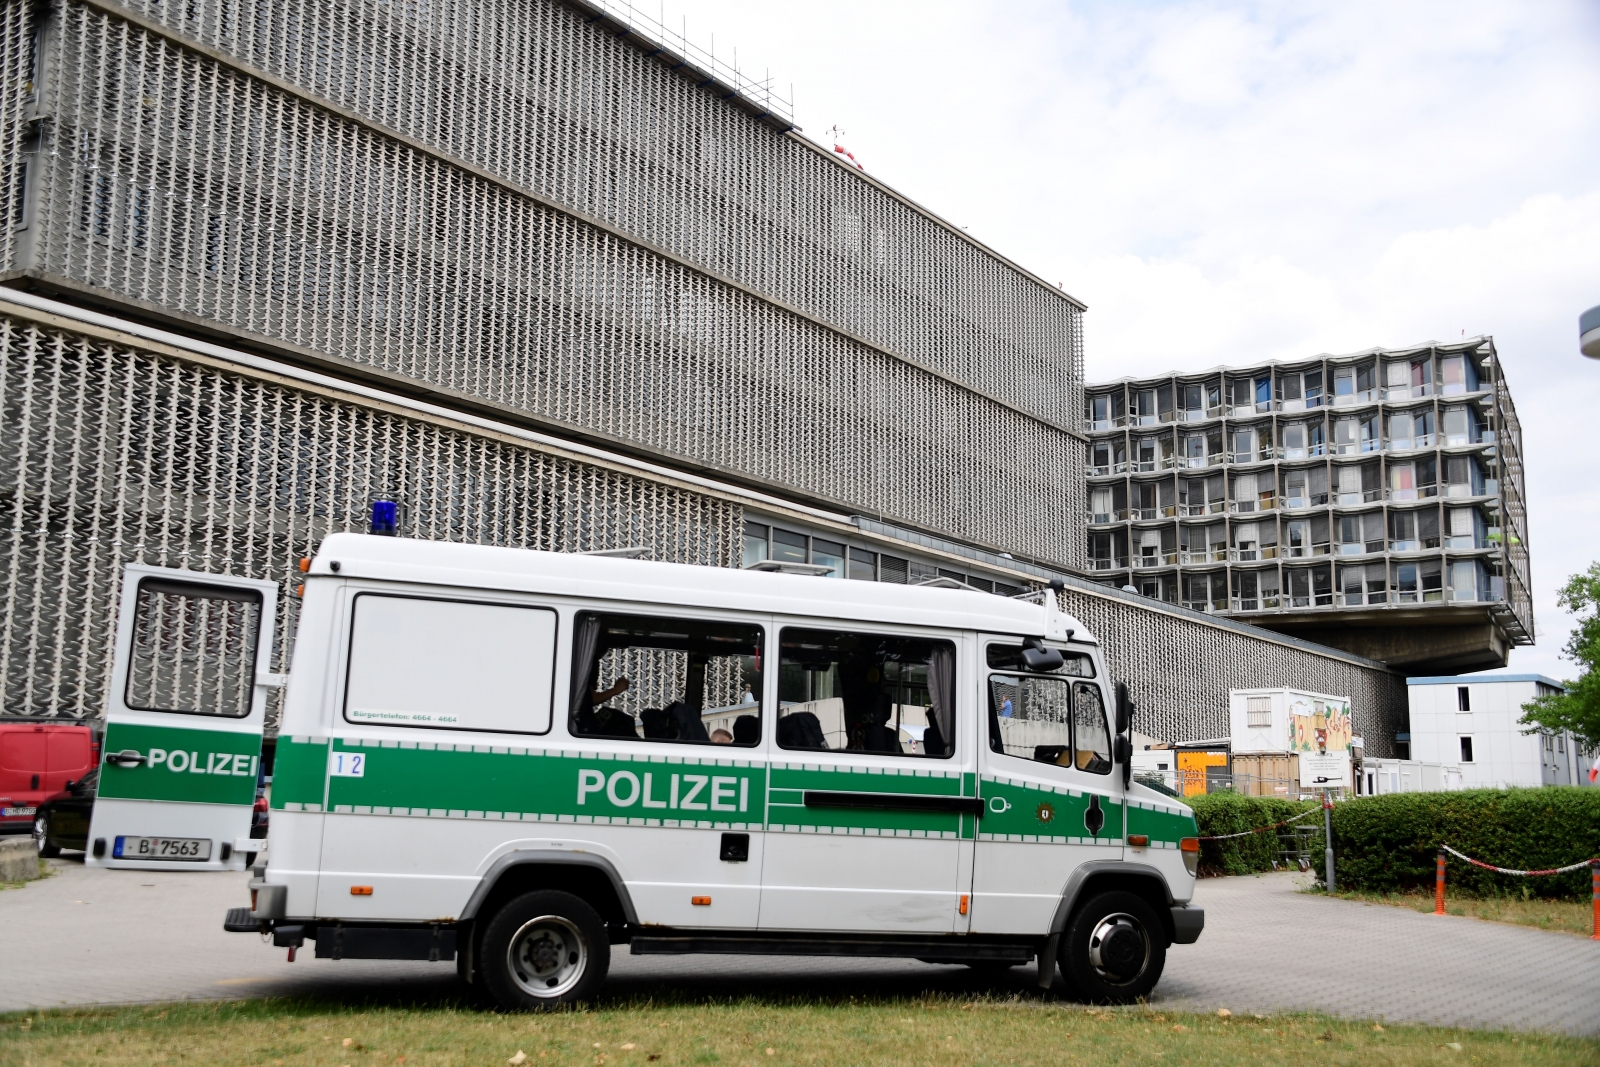 Berlin shooting: Doctor killed after gunman opens fire at clinic in Germany